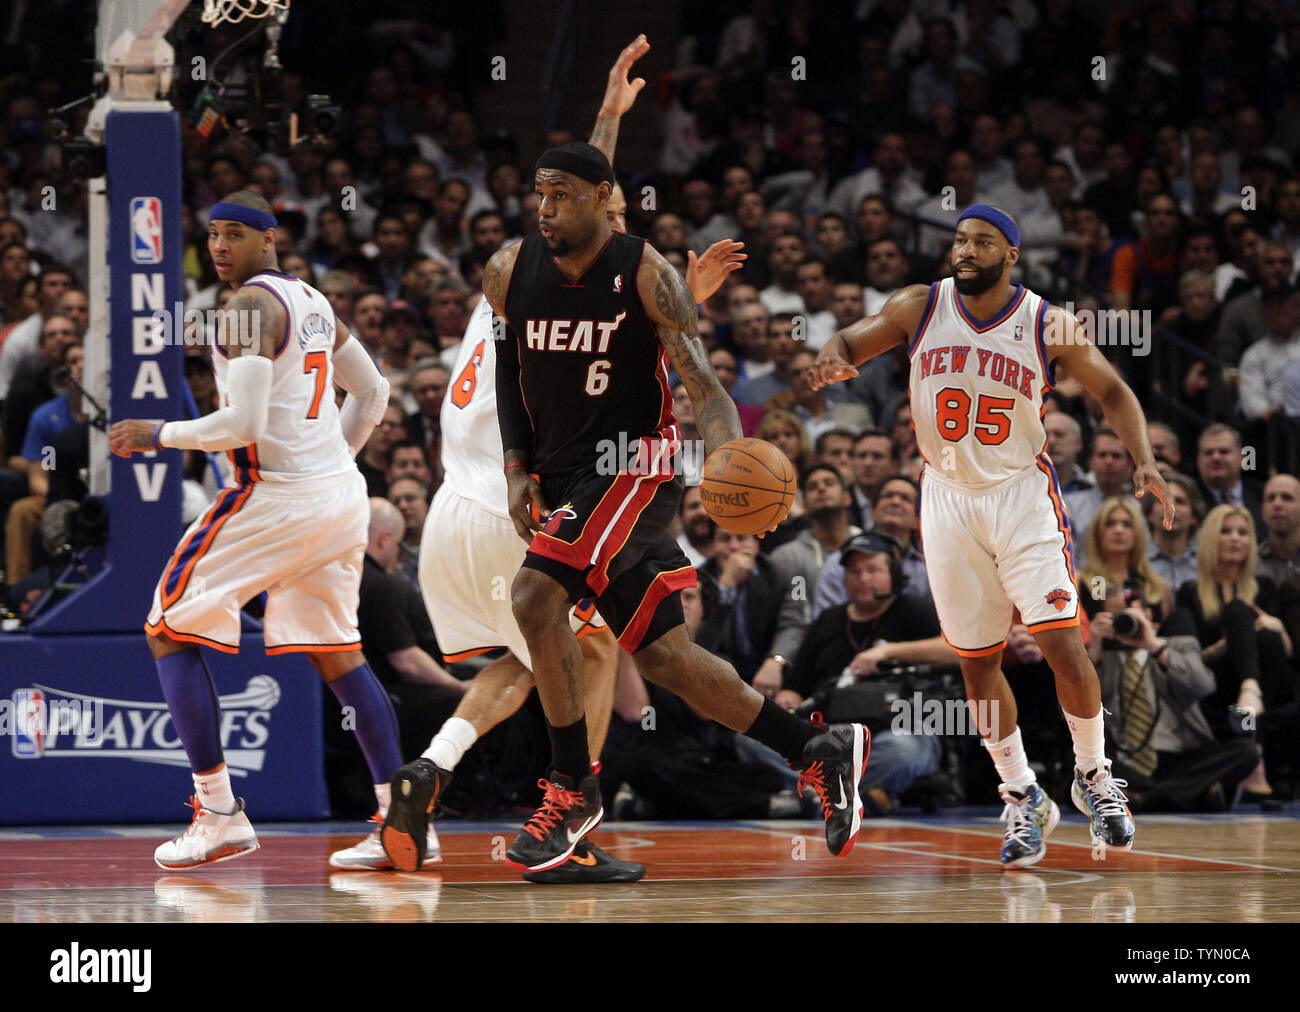 In brief: Melo leads Knicks over LeBron, Heat